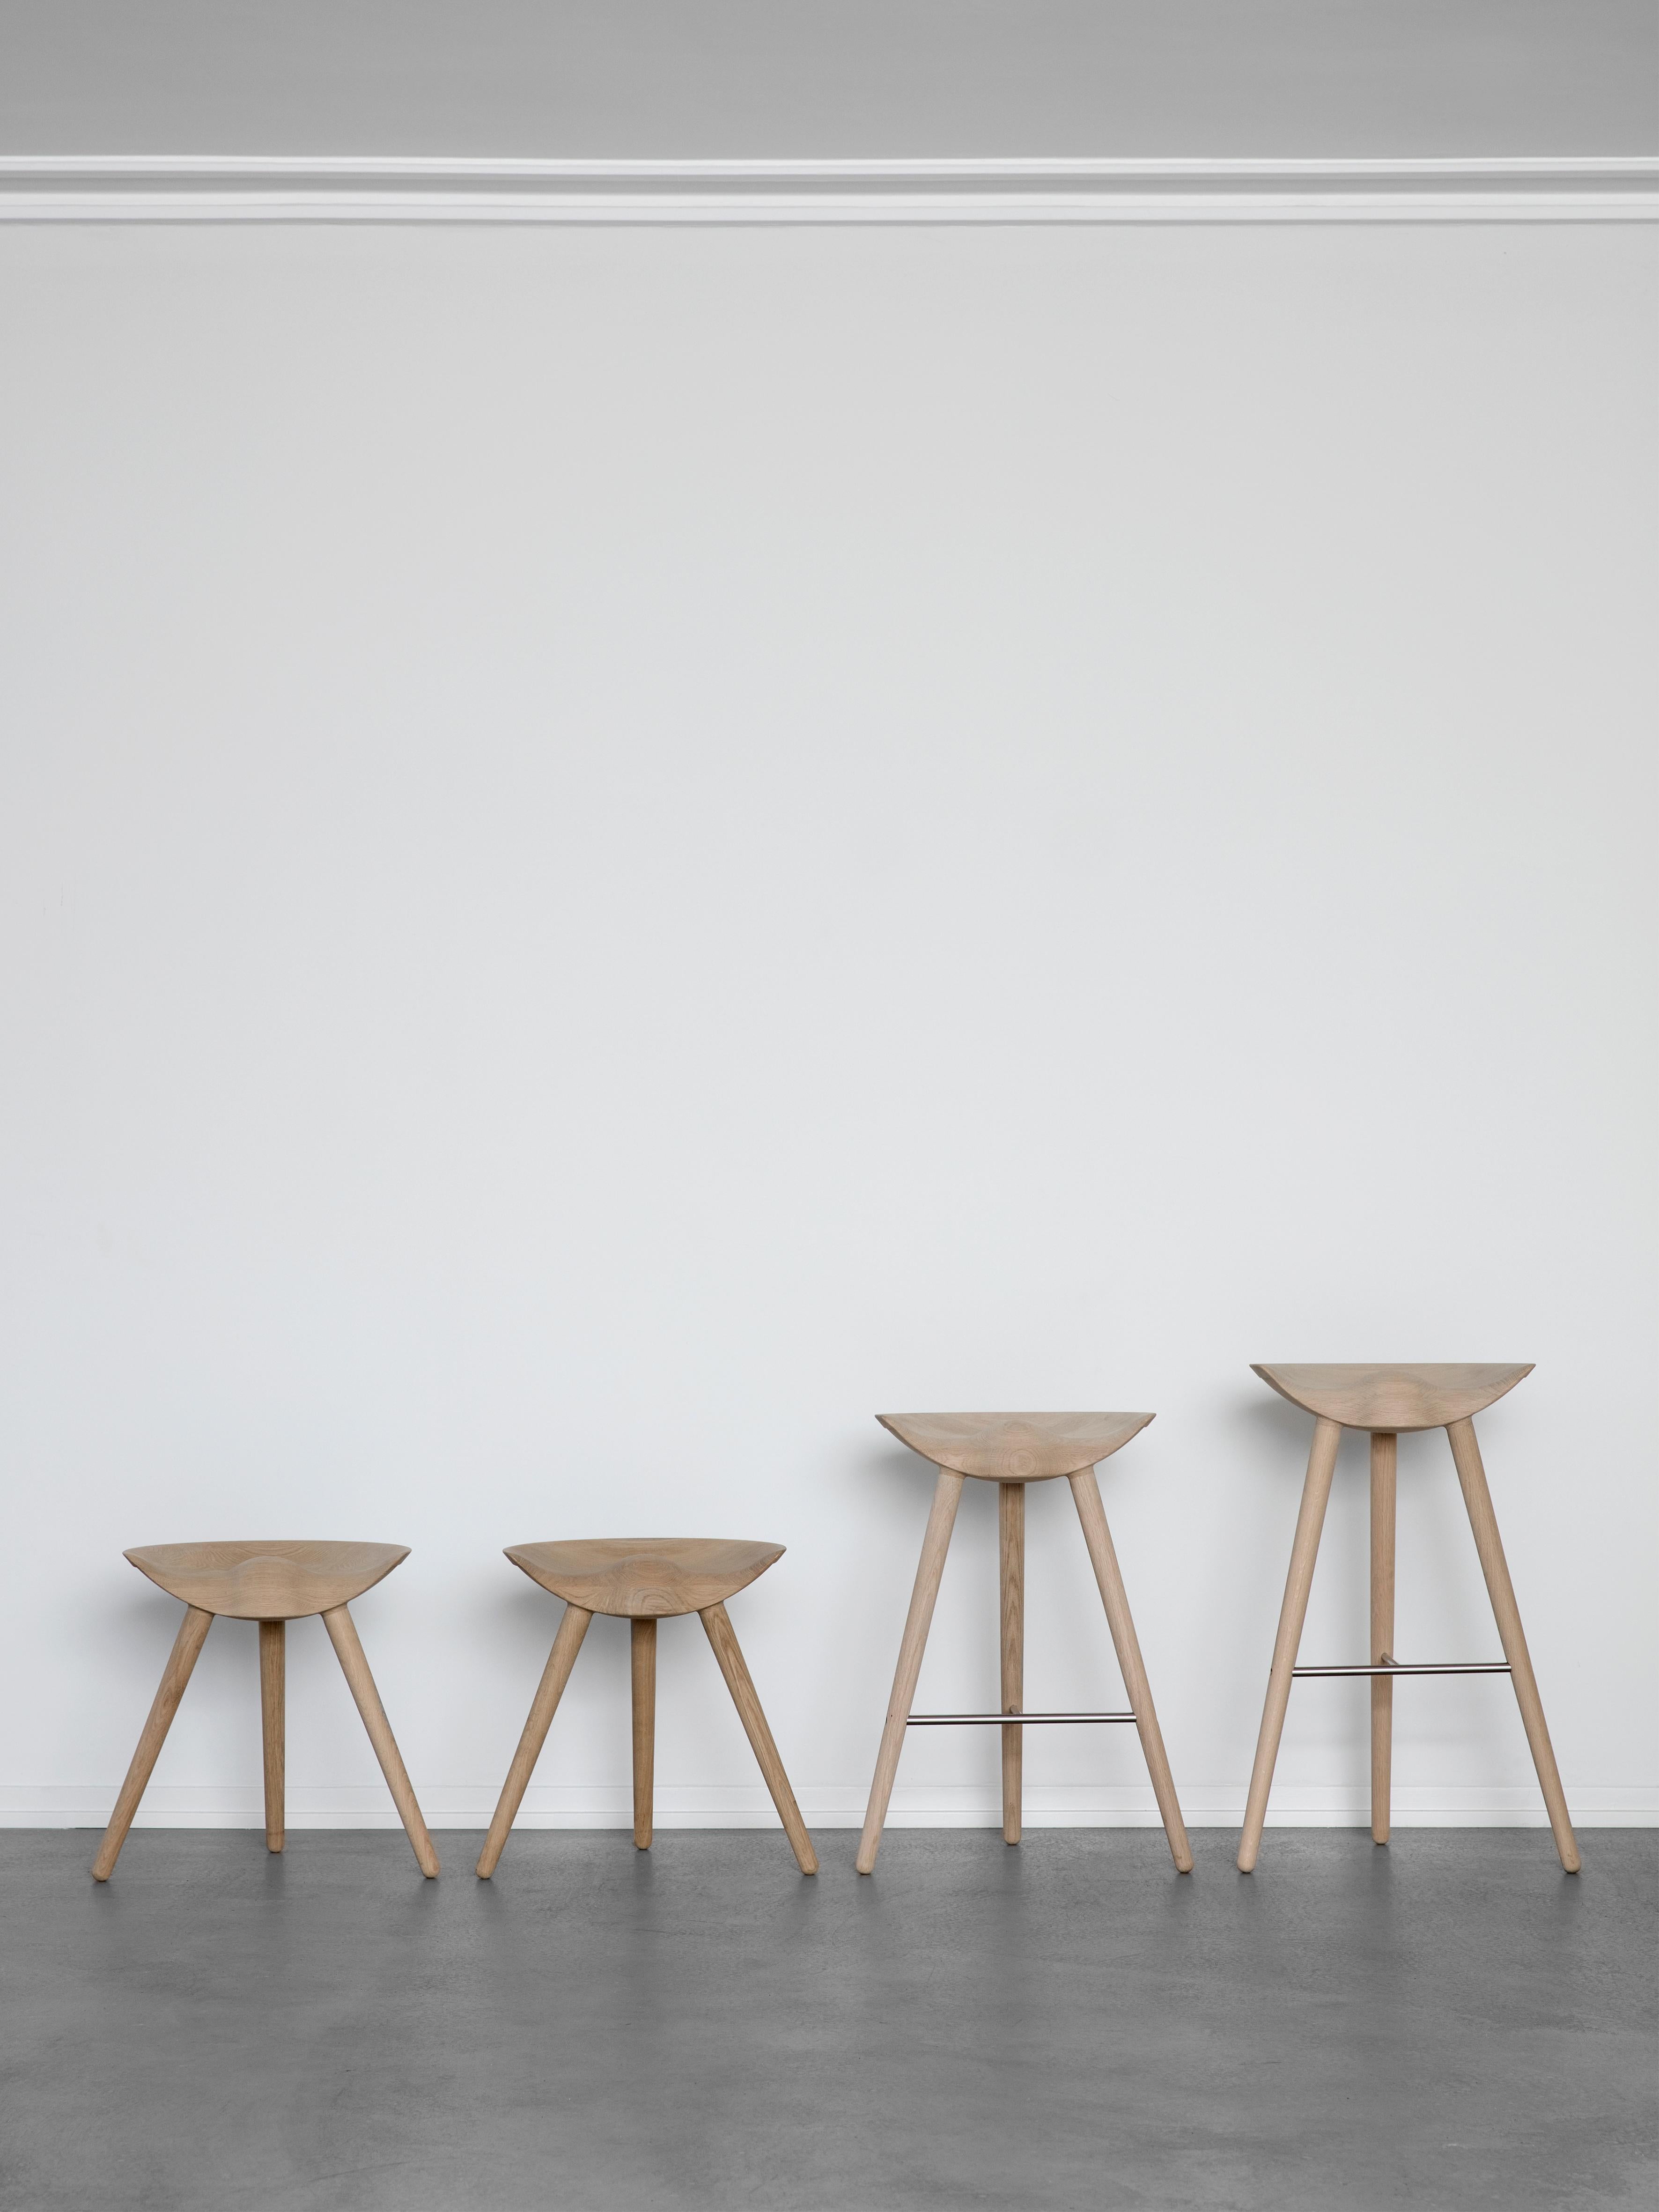 Contemporary Set Of 4 Oak and Stainless Steel Bar Stools by Lassen